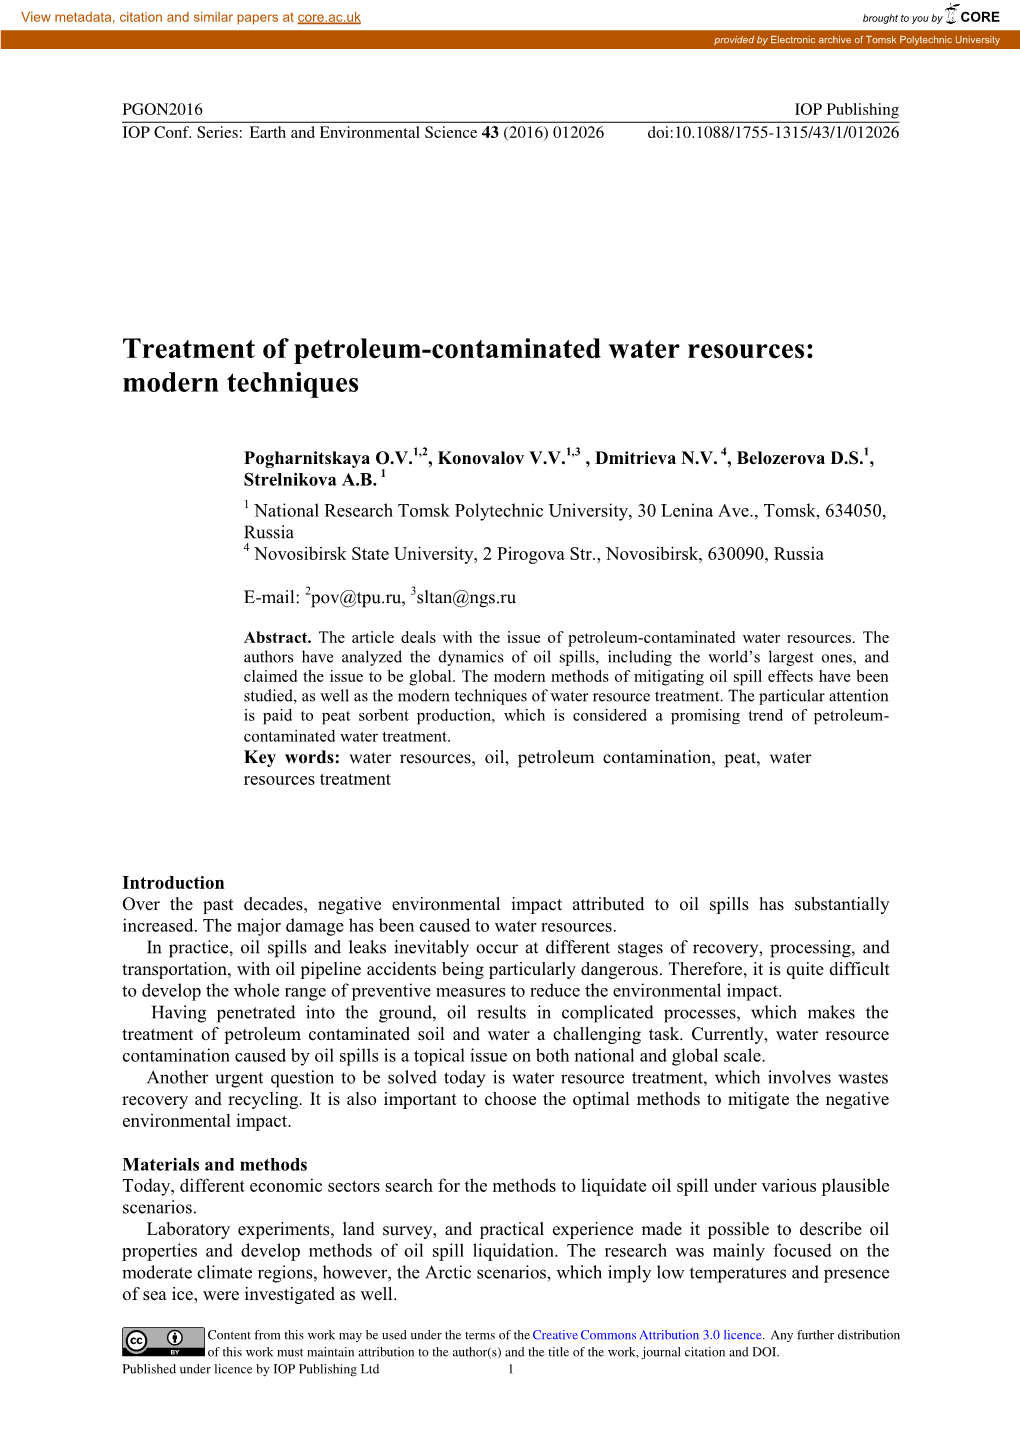 Treatment of Petroleum-Contaminated Water Resources: Modern Techniques